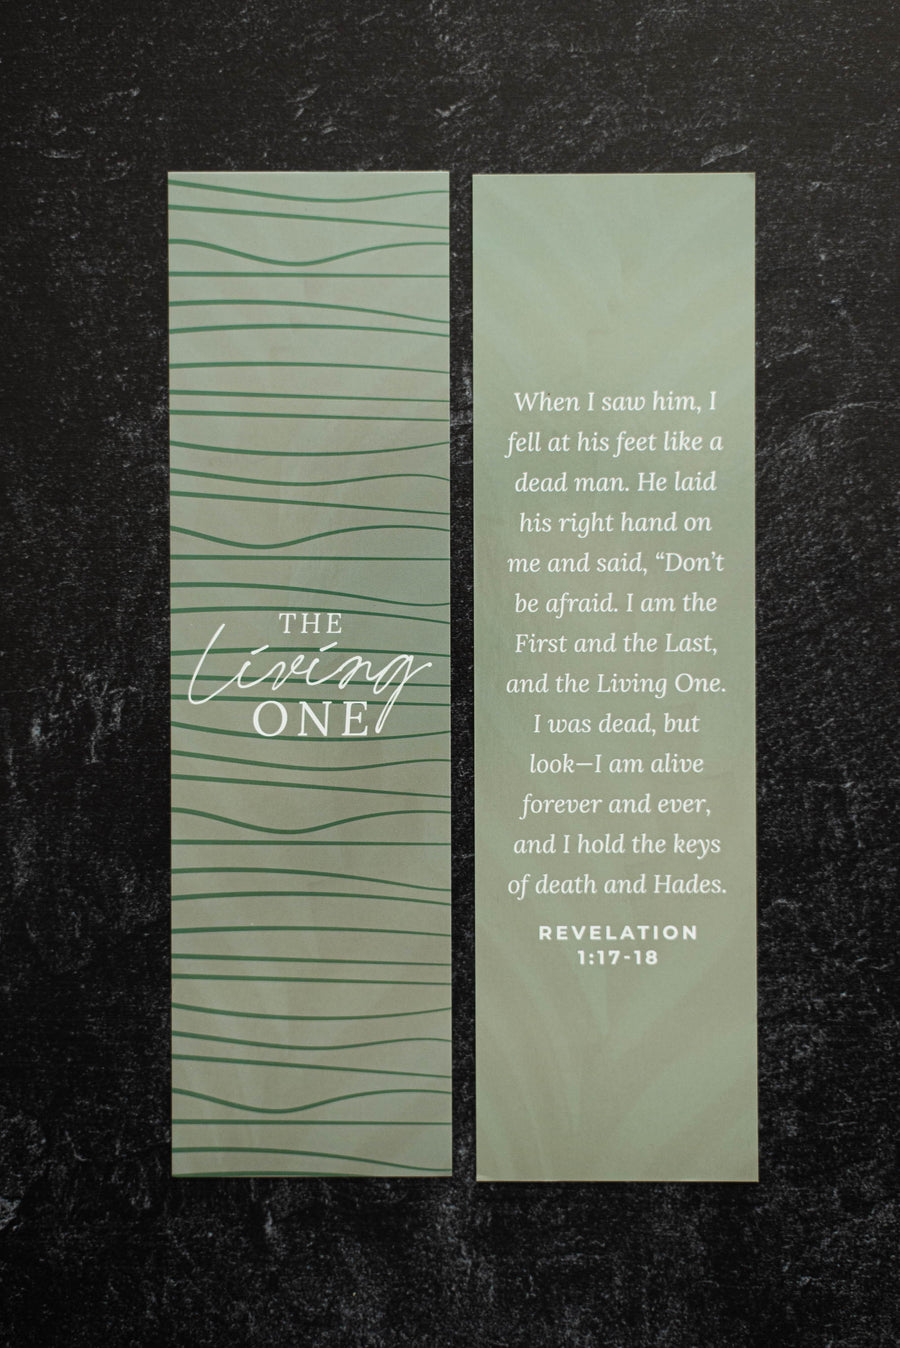 Scripture Memory Bookmark Set: Overcoming Anxiety by Meditating on the Character of Christ